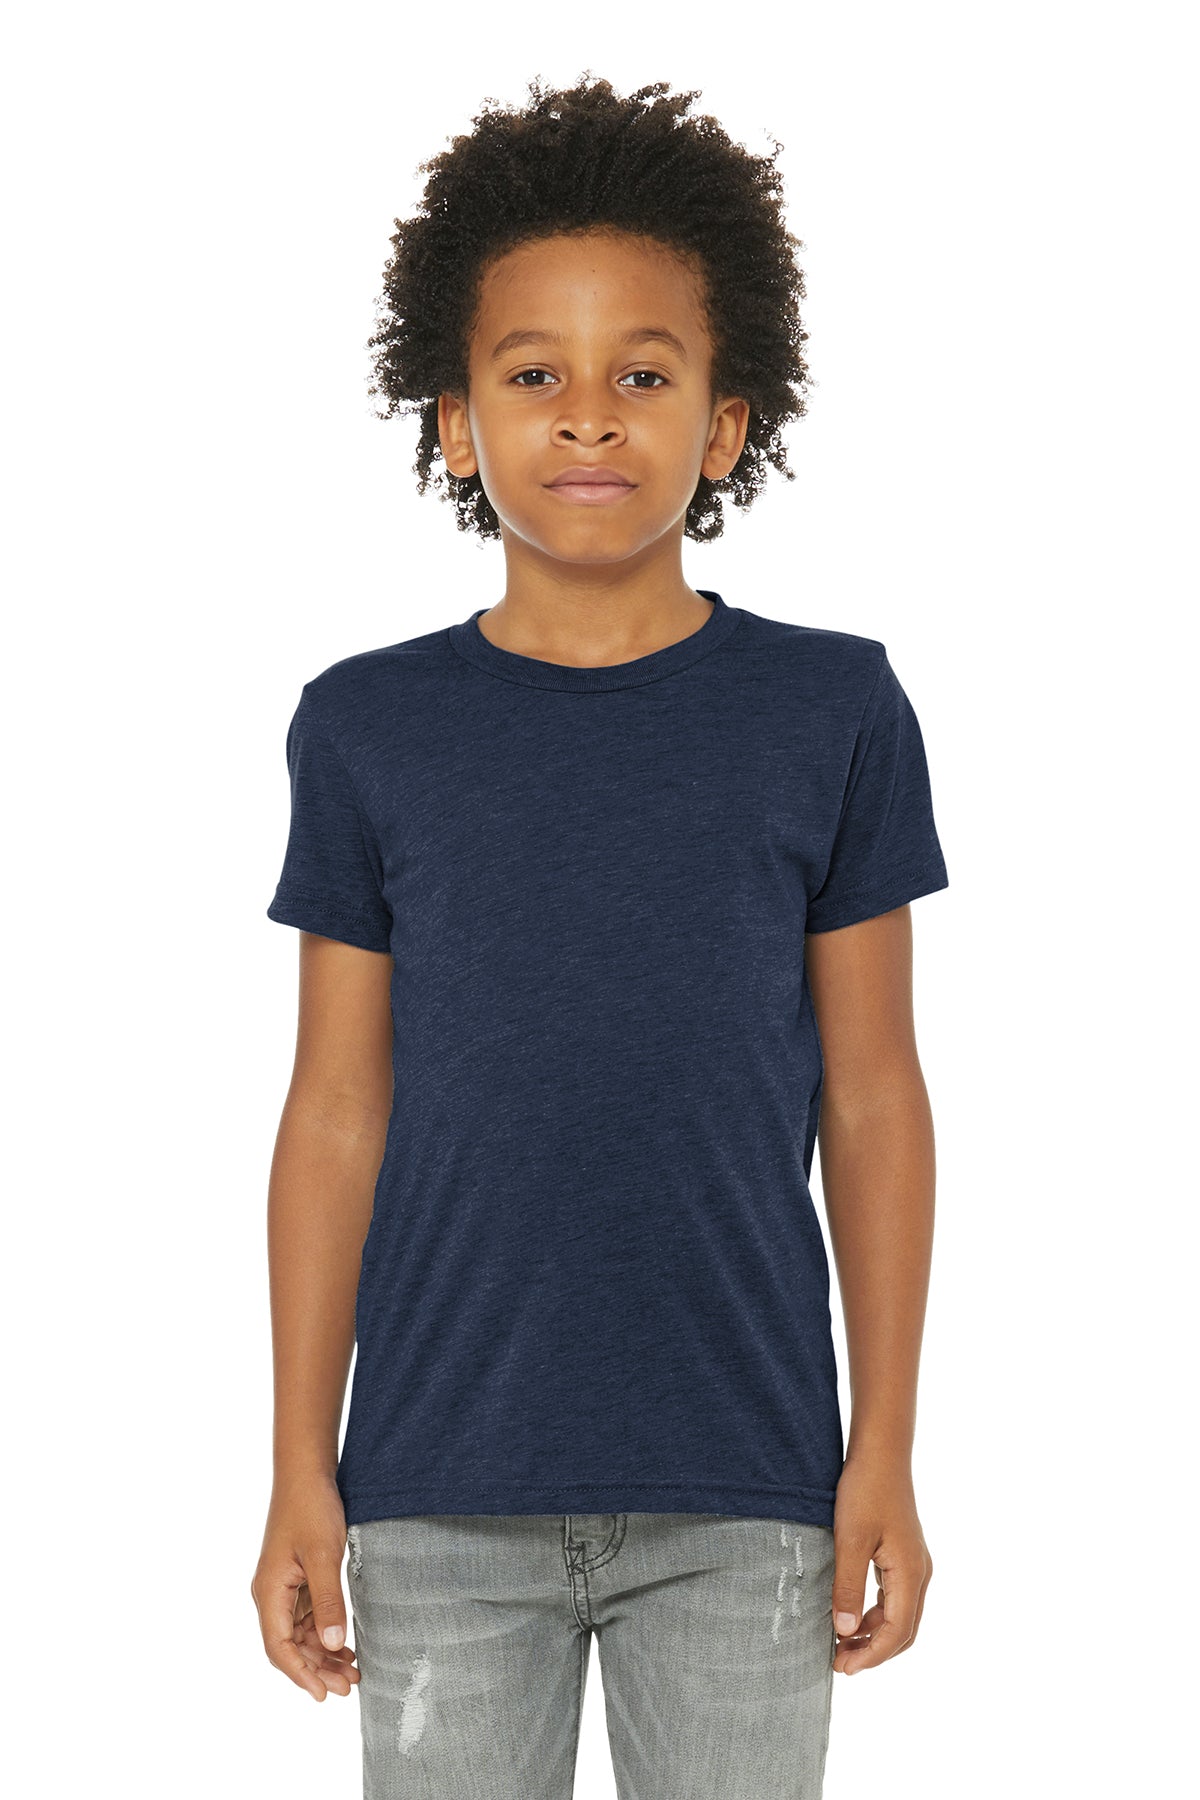 LL "Life is Better at Loon Lake" Youth Triblend Short Sleeve Tee